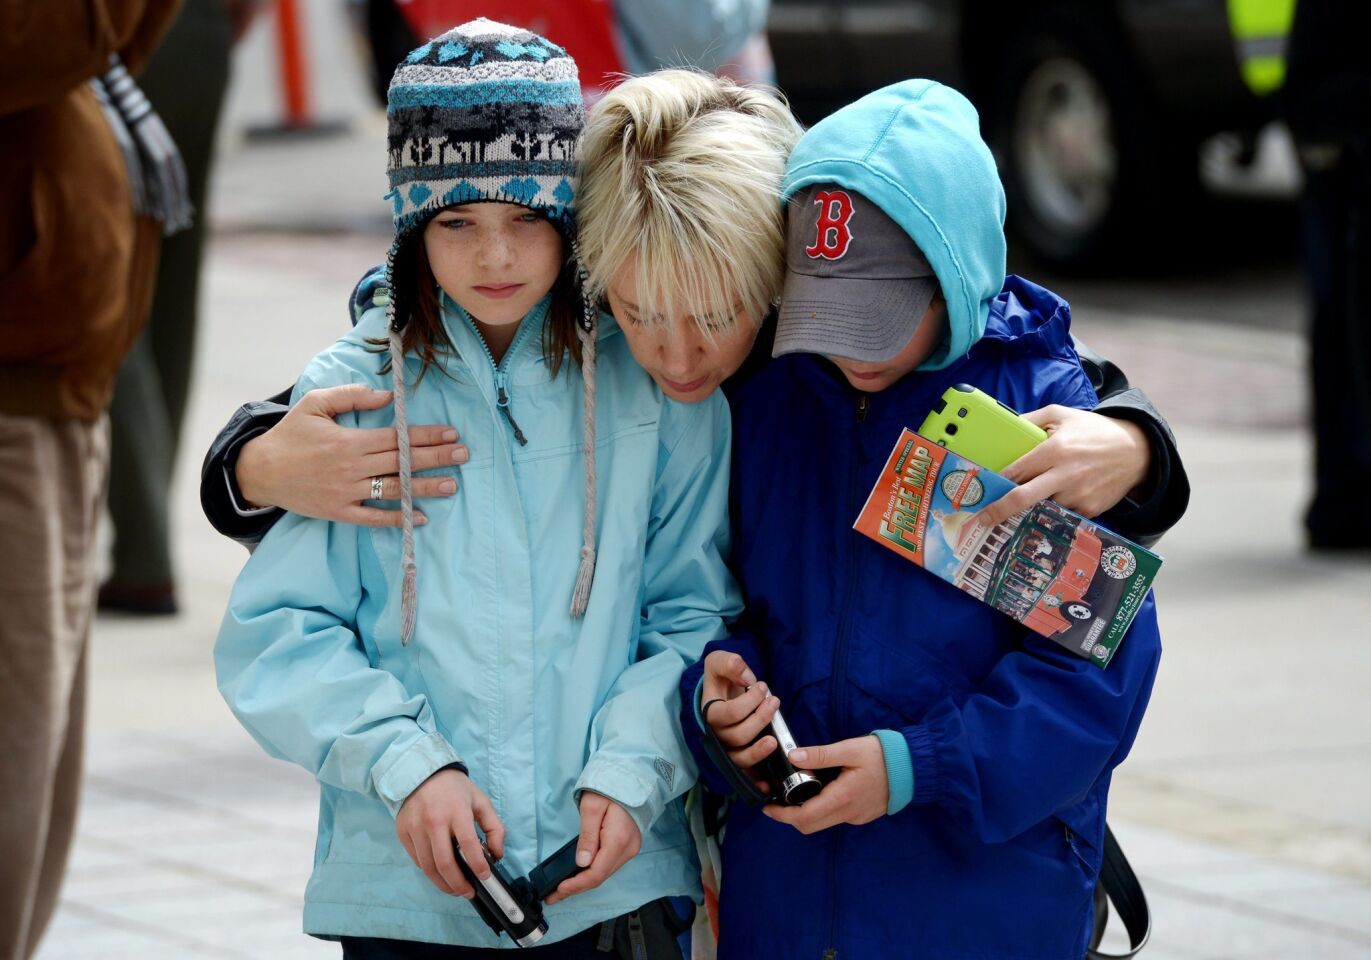 A woman and two children gather at the site of the first bombing near the finish line of the Boston Marathon on Boylston Street in Boston.